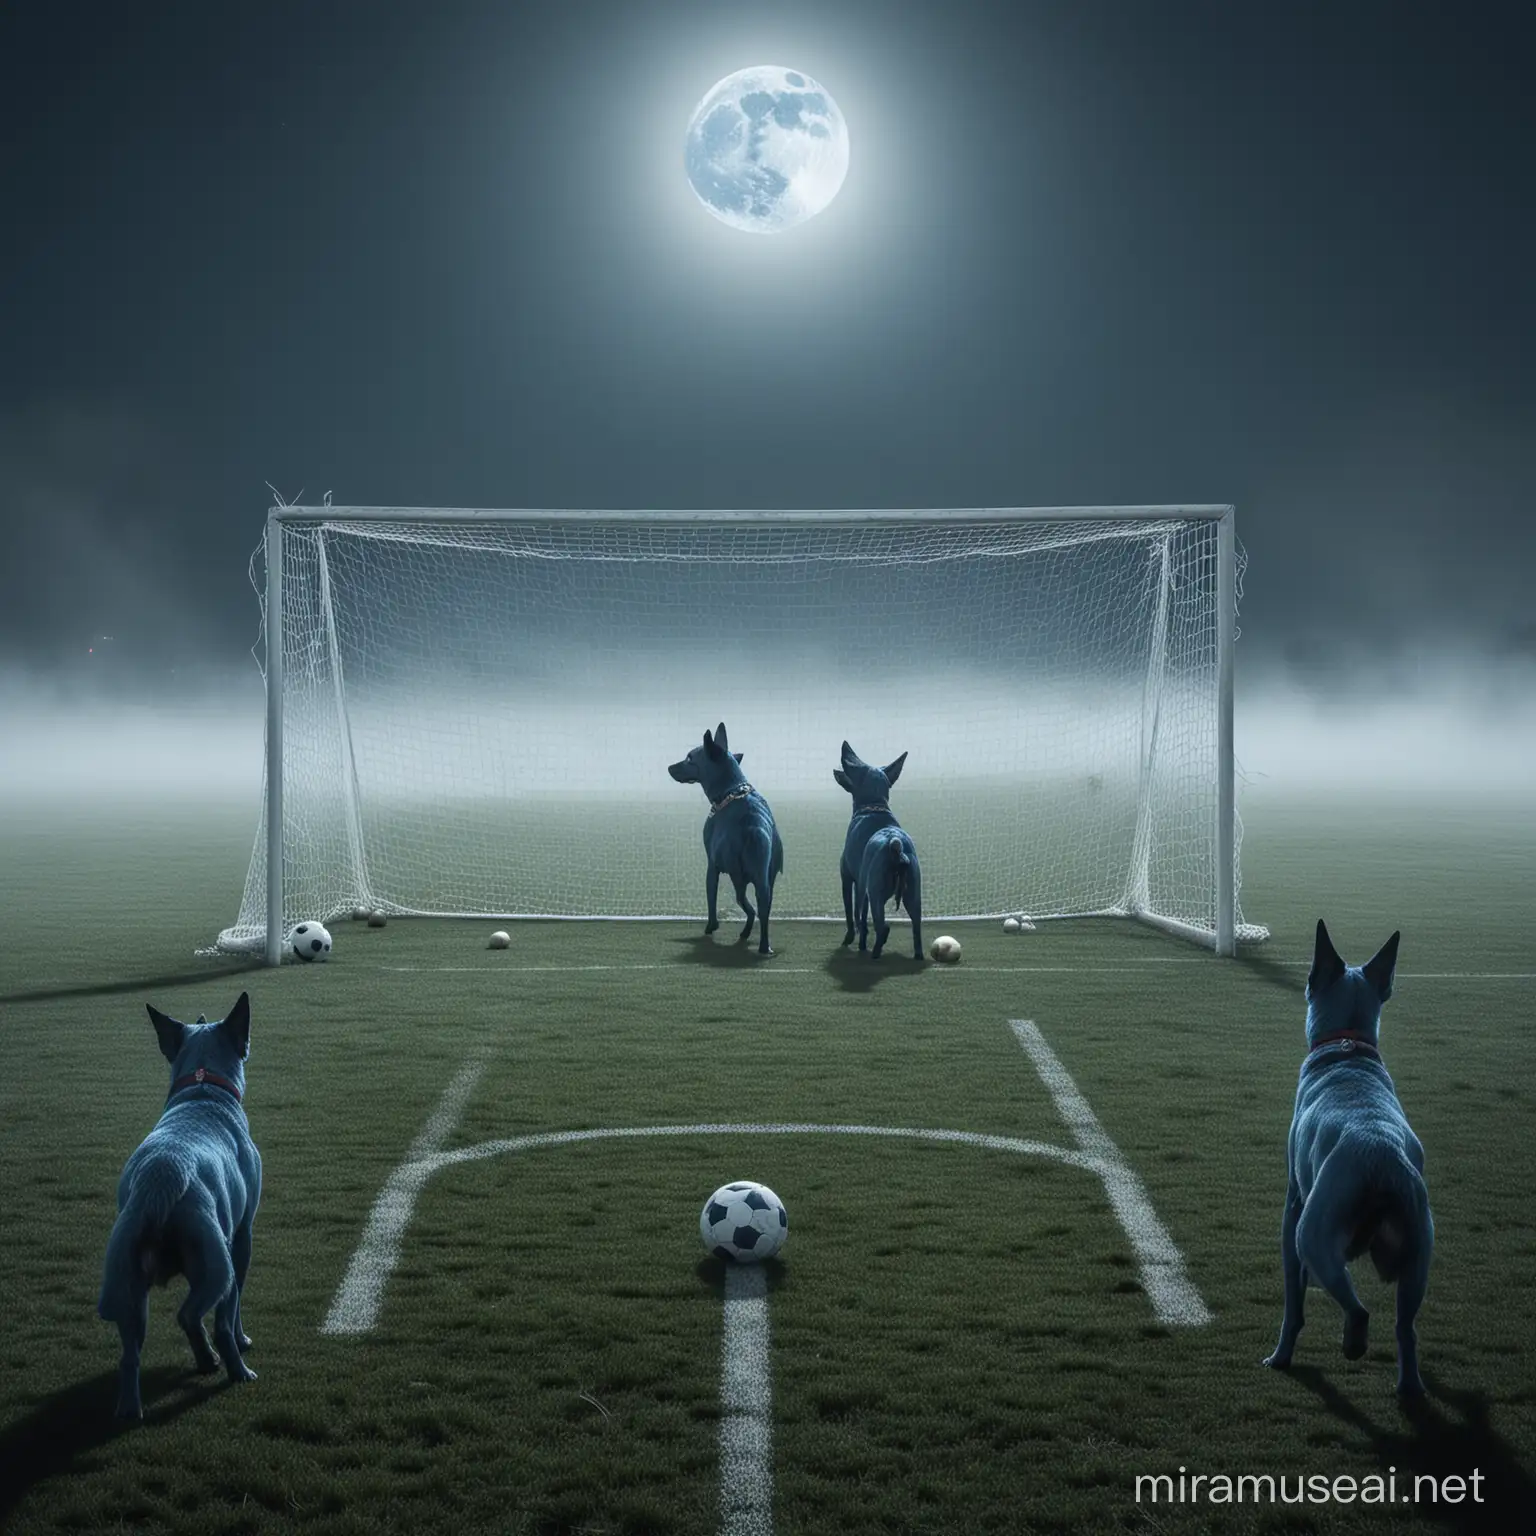 destroyed football field, ball at penalty kick, human in front of the goal, fog, 2 blue dogs in front of the ball, moon, dark